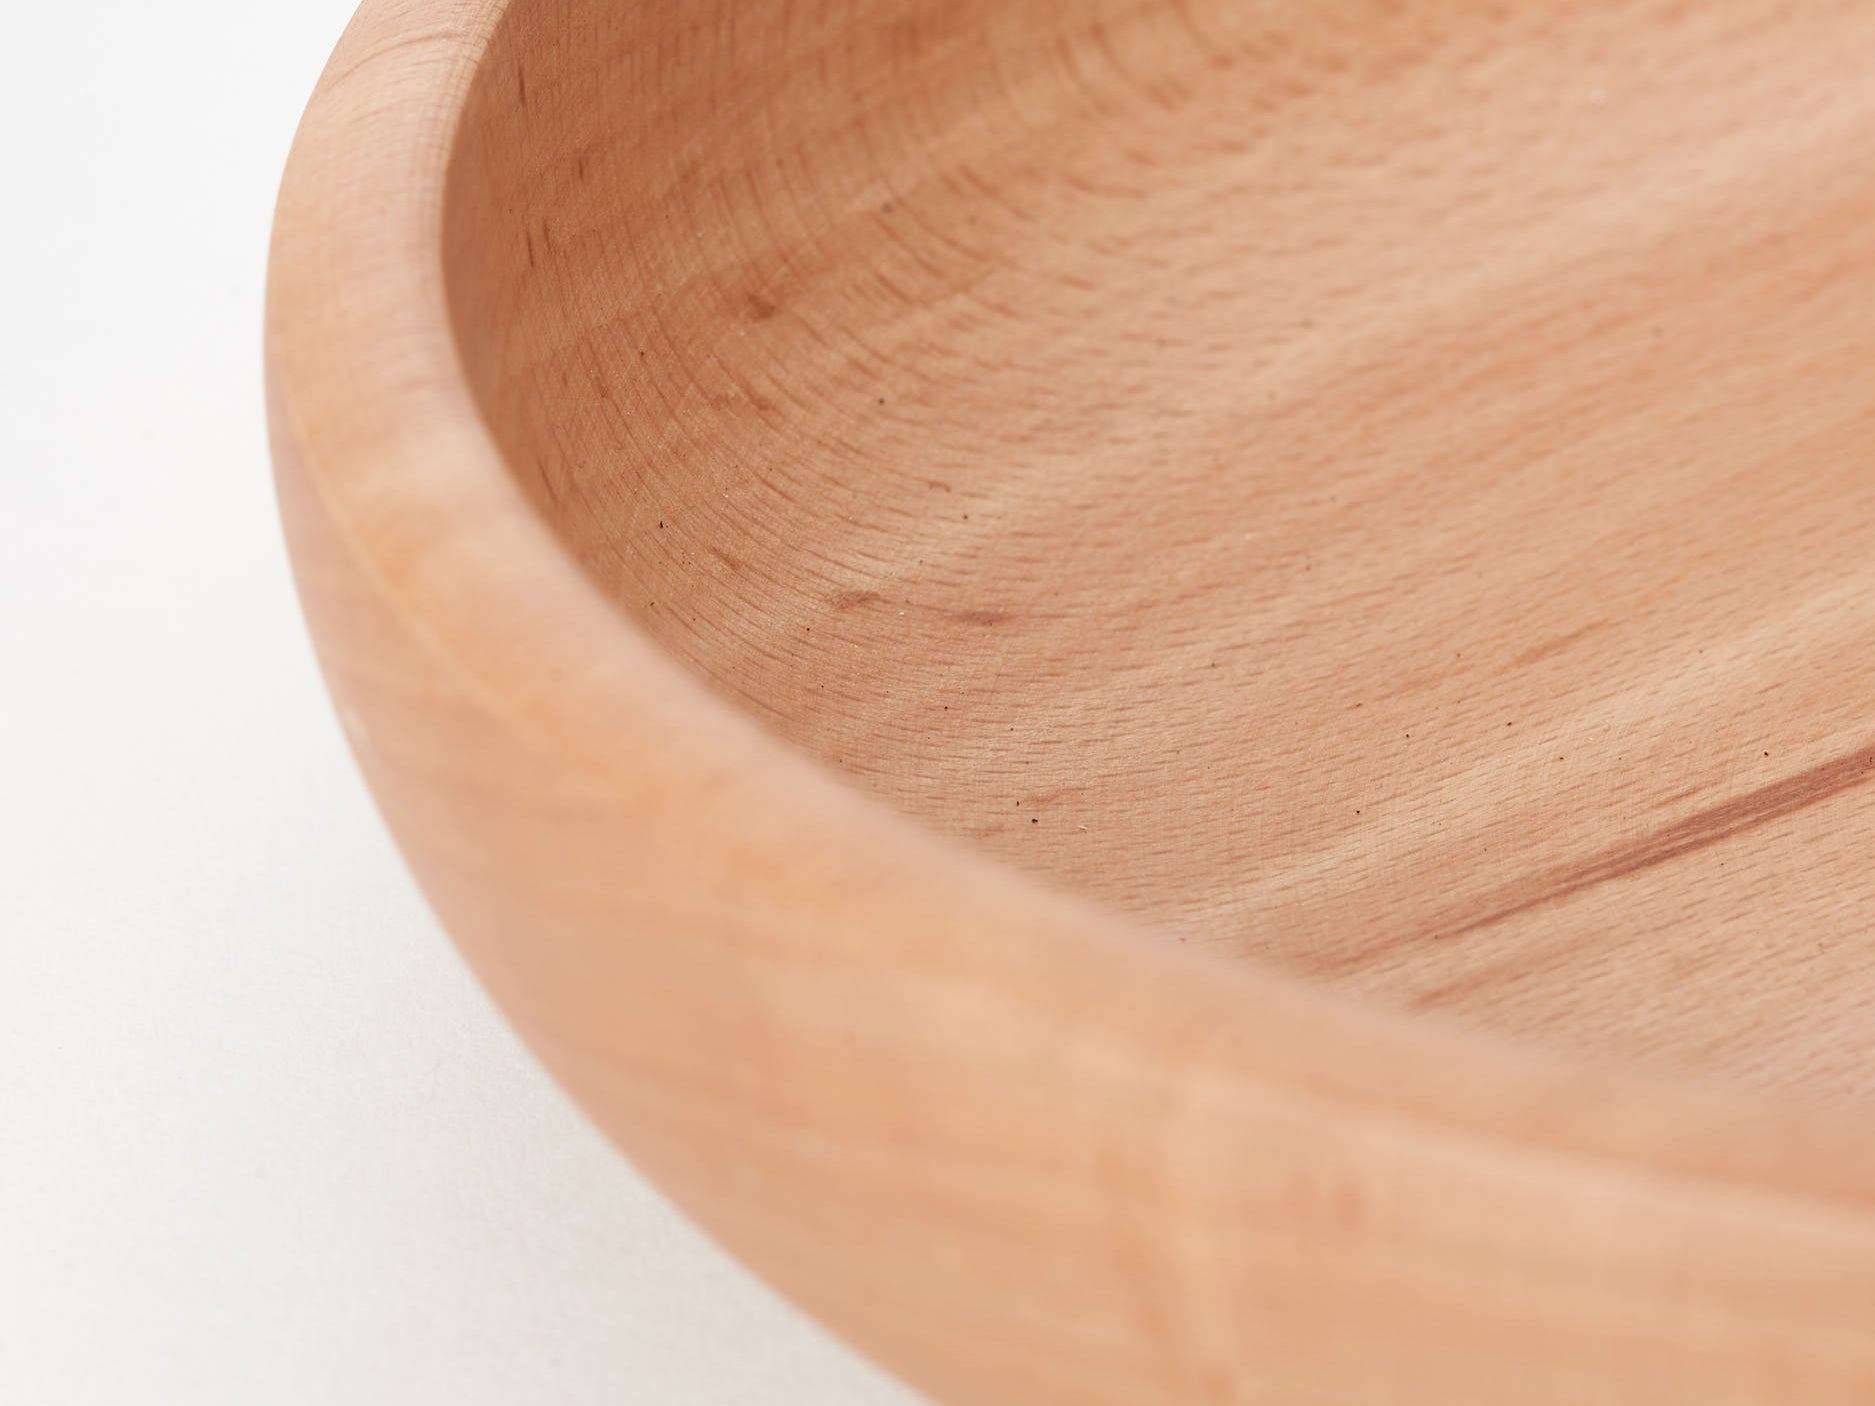 Beech Wood Deep Plate (Small) - Lucid and Real